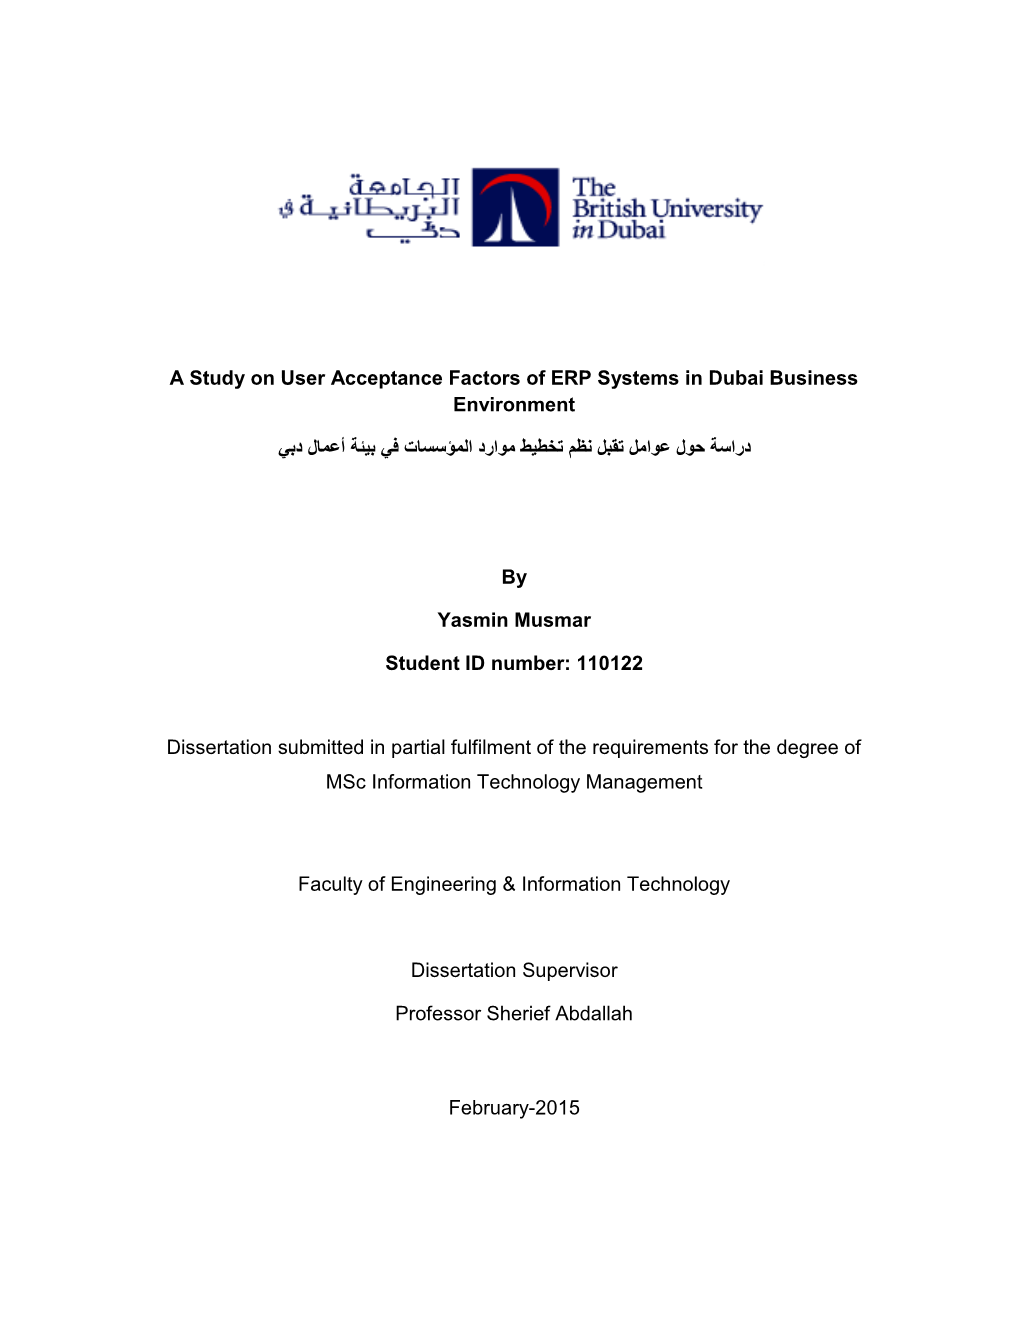 A Study on User Acceptance Factors of ERP Systems in Dubai Business Environment